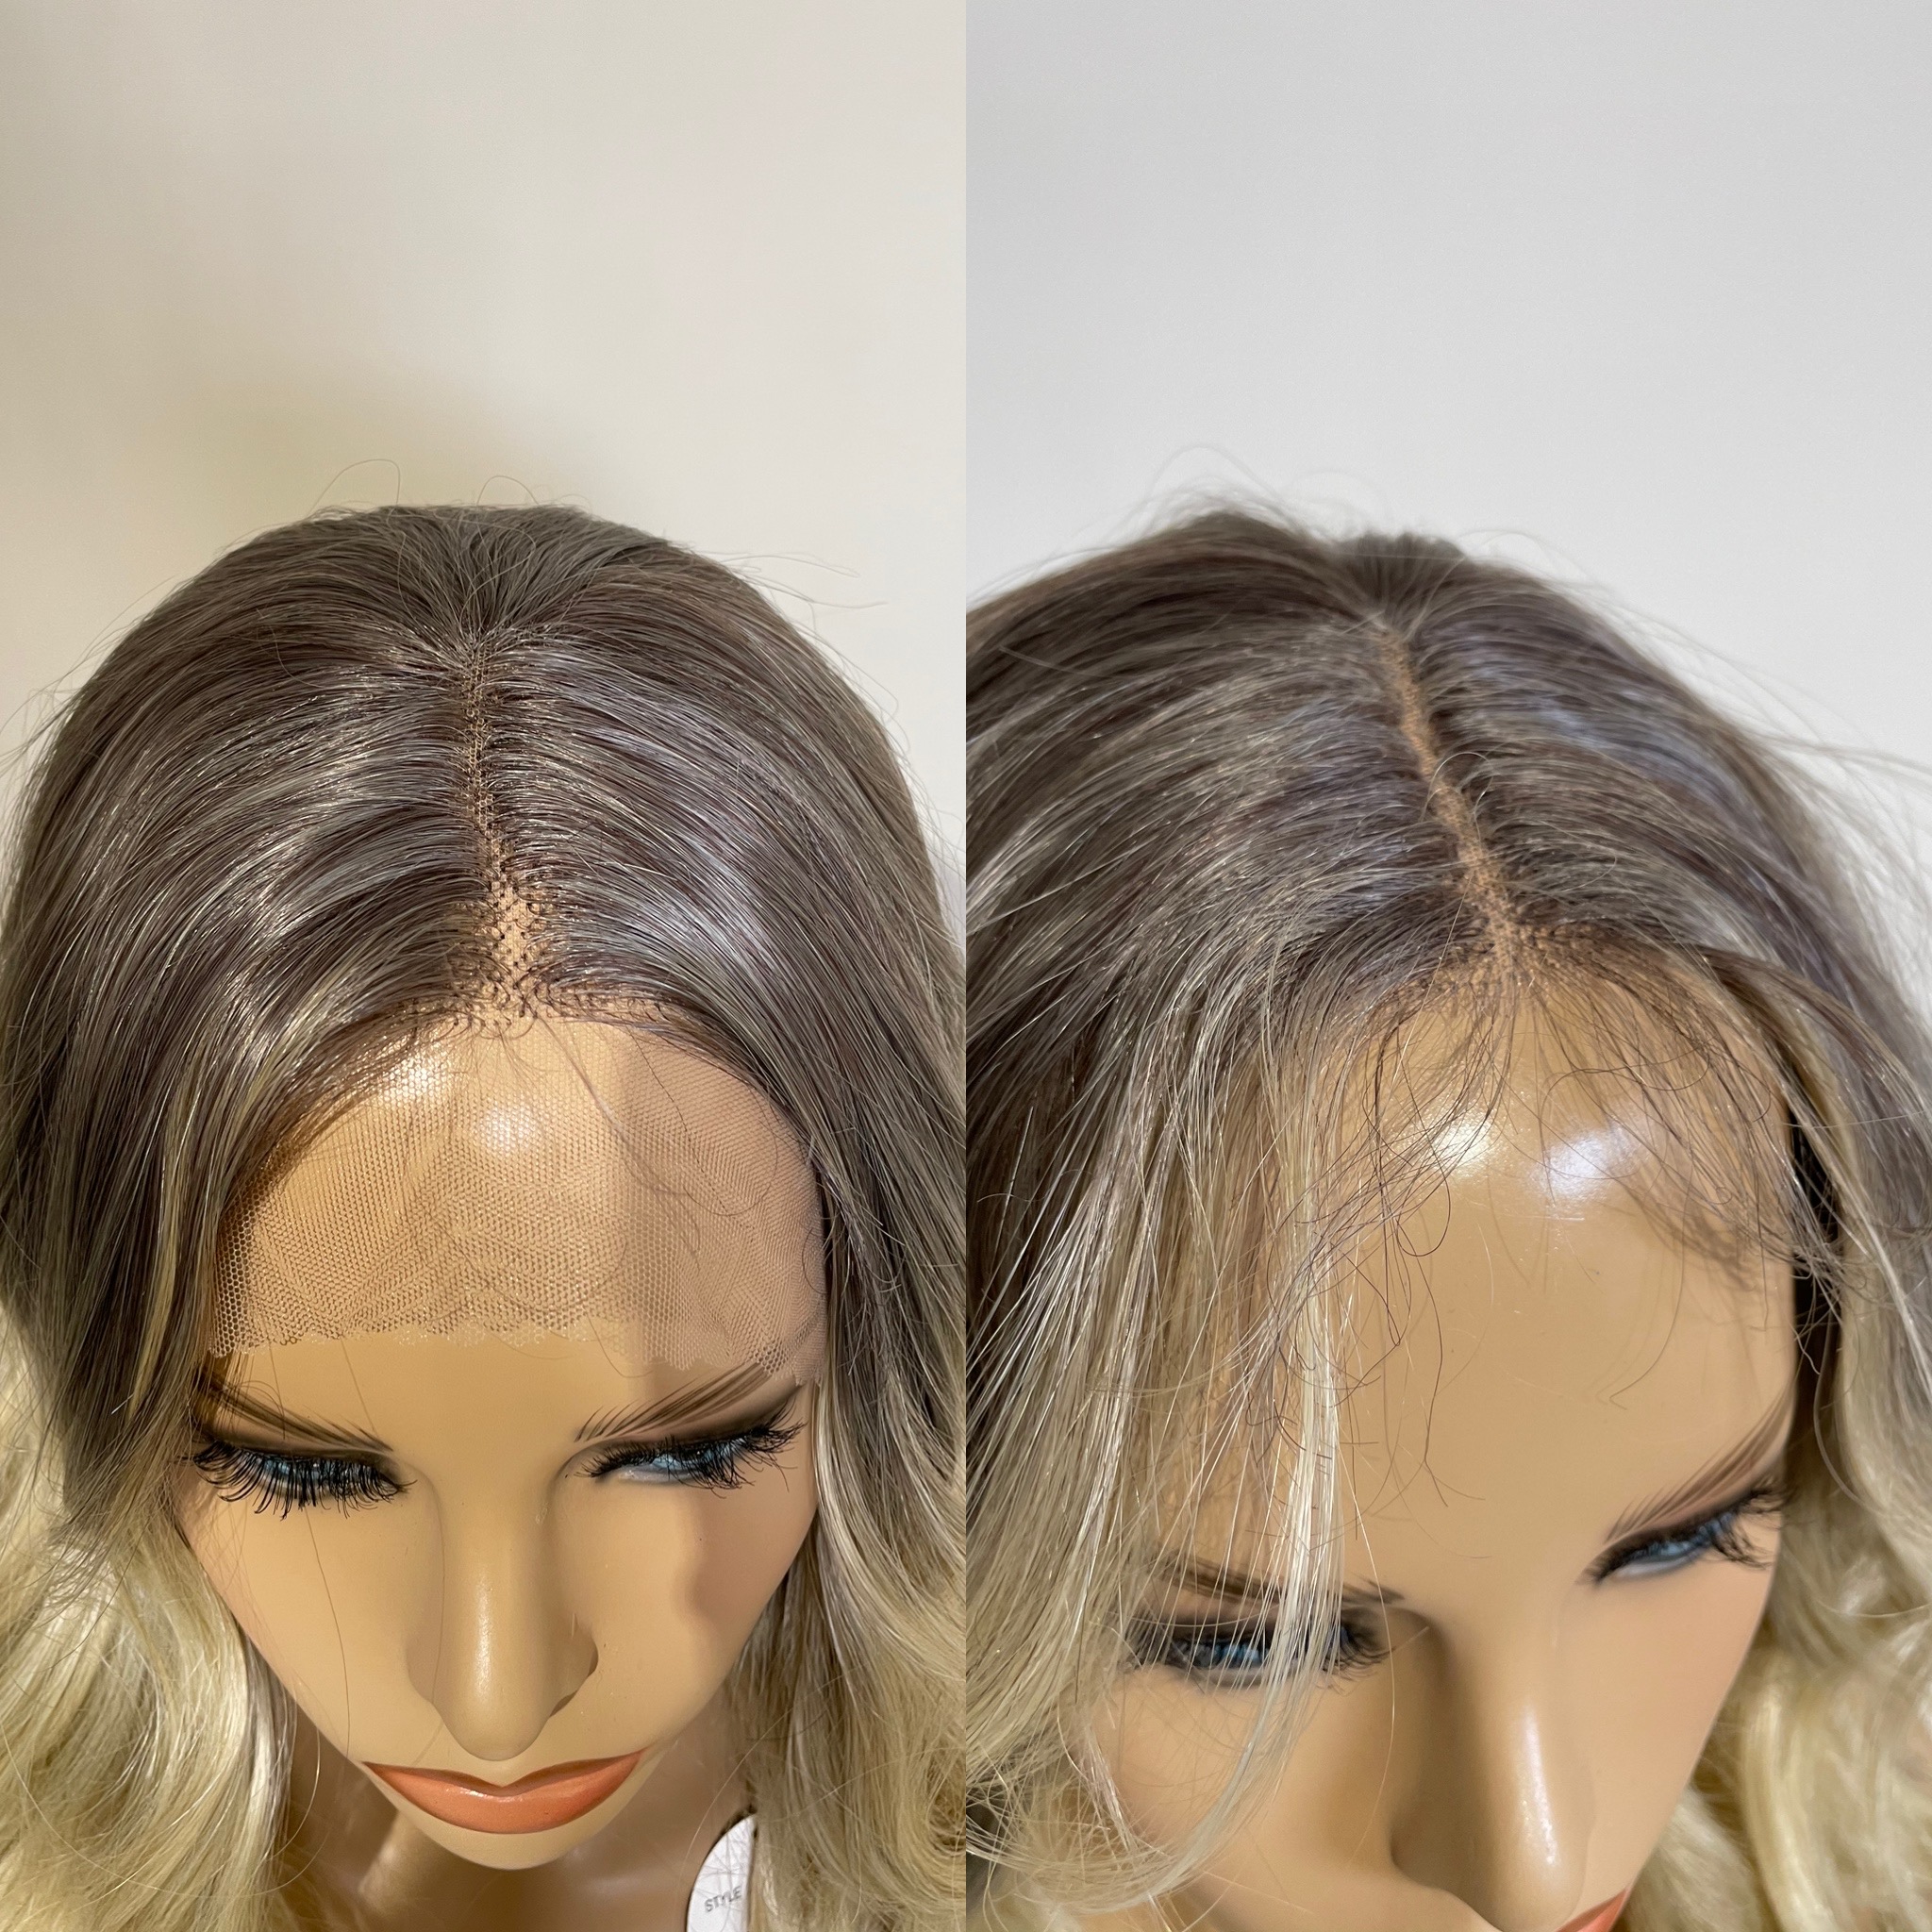 Ready to wear/Haircut on your syntetic wig